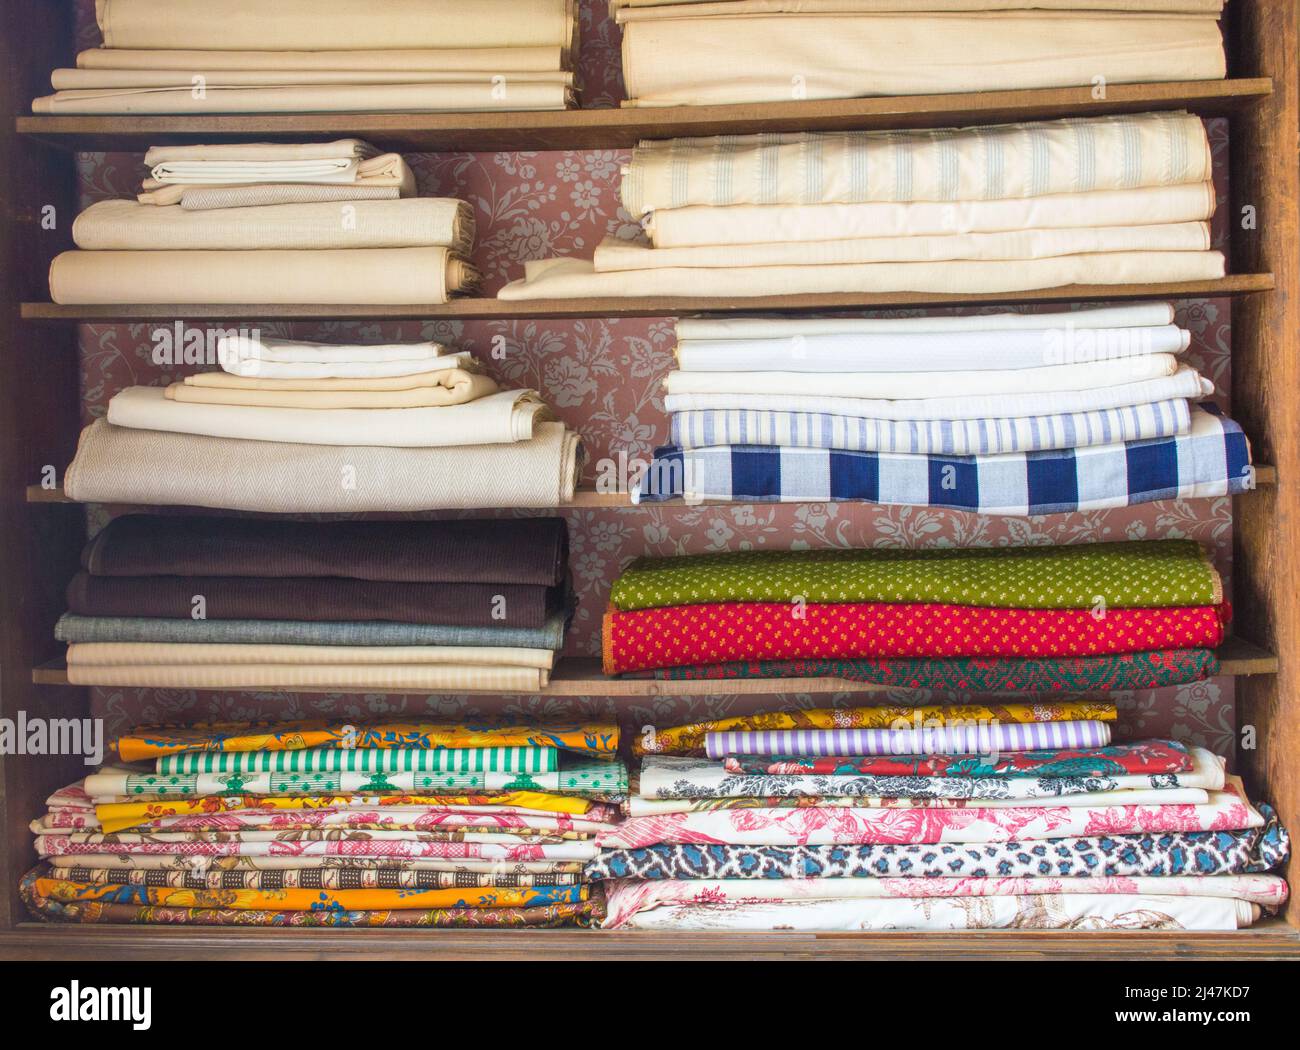 rustic wooden shelves filled with stacks of colorful colonial fabrics Stock Photo